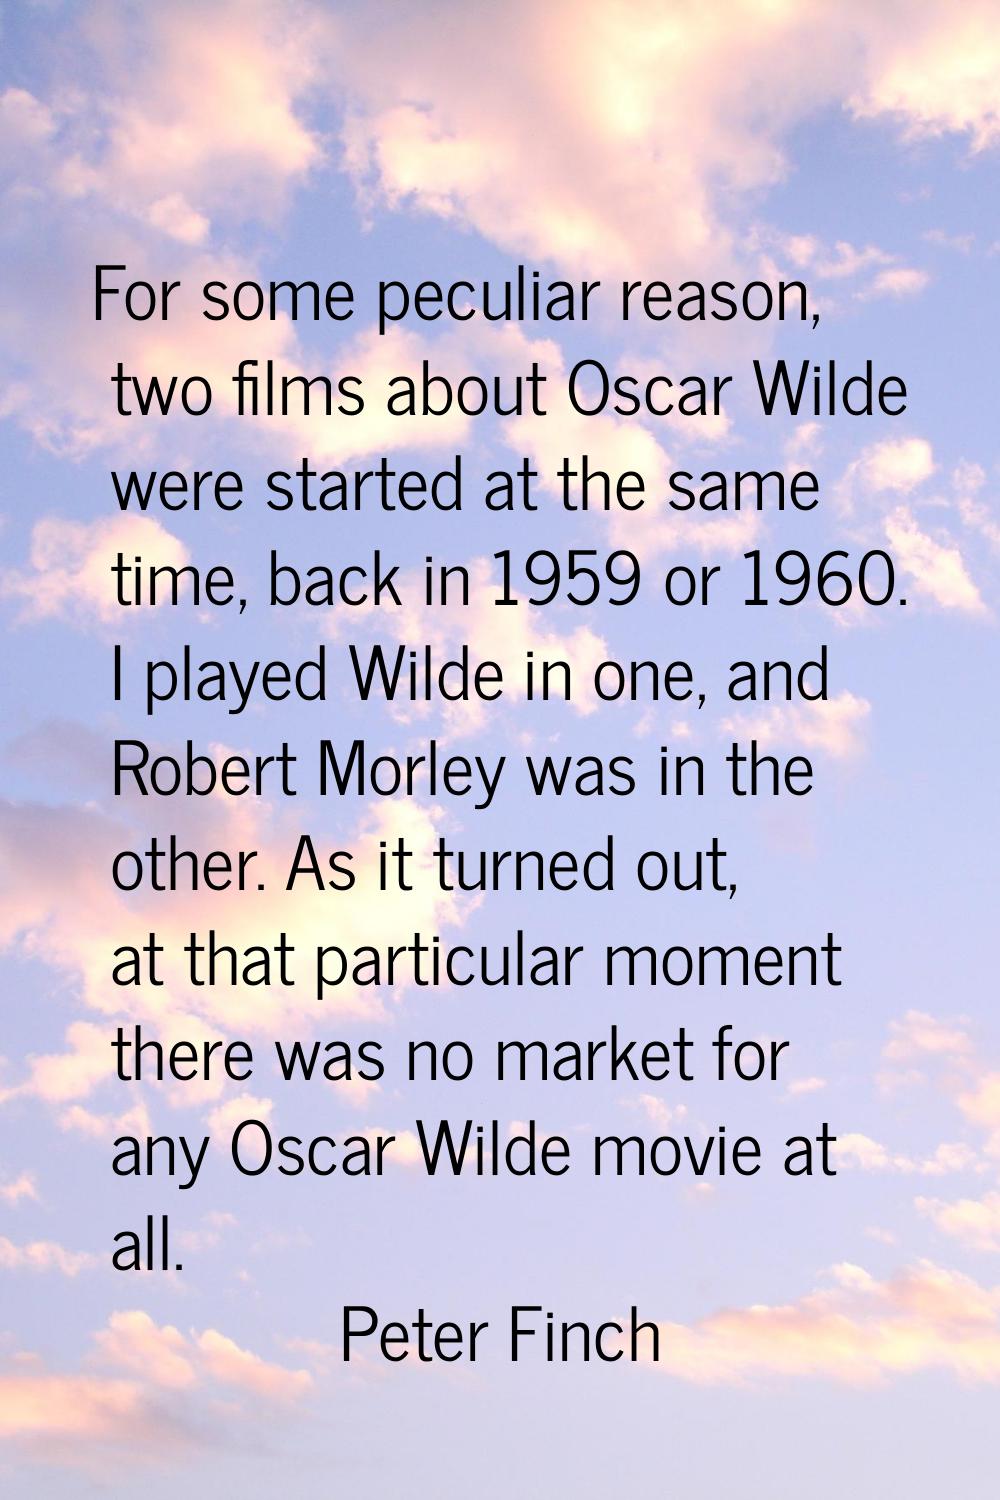 For some peculiar reason, two films about Oscar Wilde were started at the same time, back in 1959 o